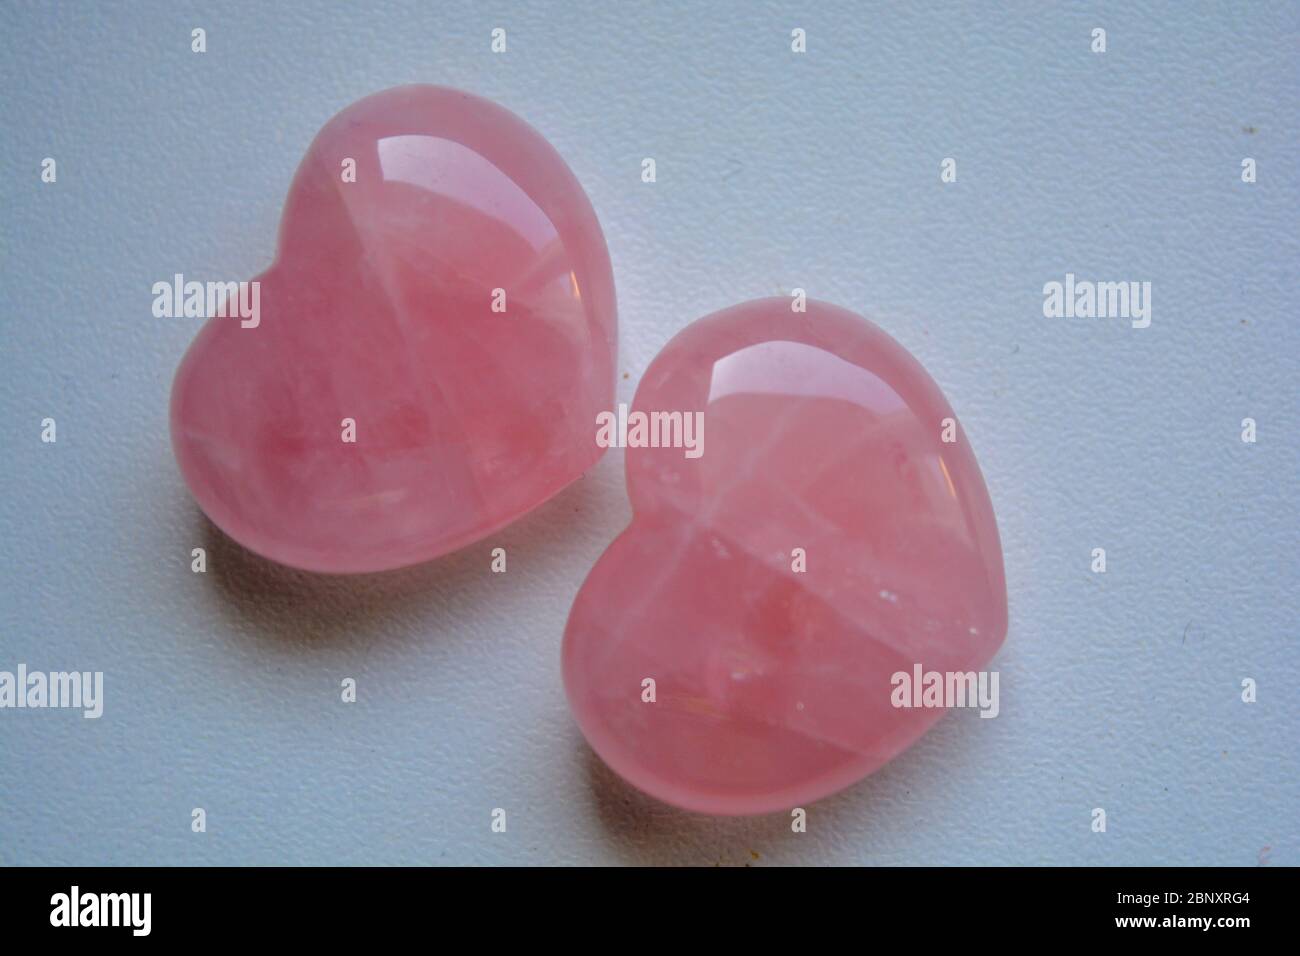 Two heart shaped semi-precious stones. Light pink quartz gems on a white background. Romantic carved minerals, precious stone gift Stock Photo